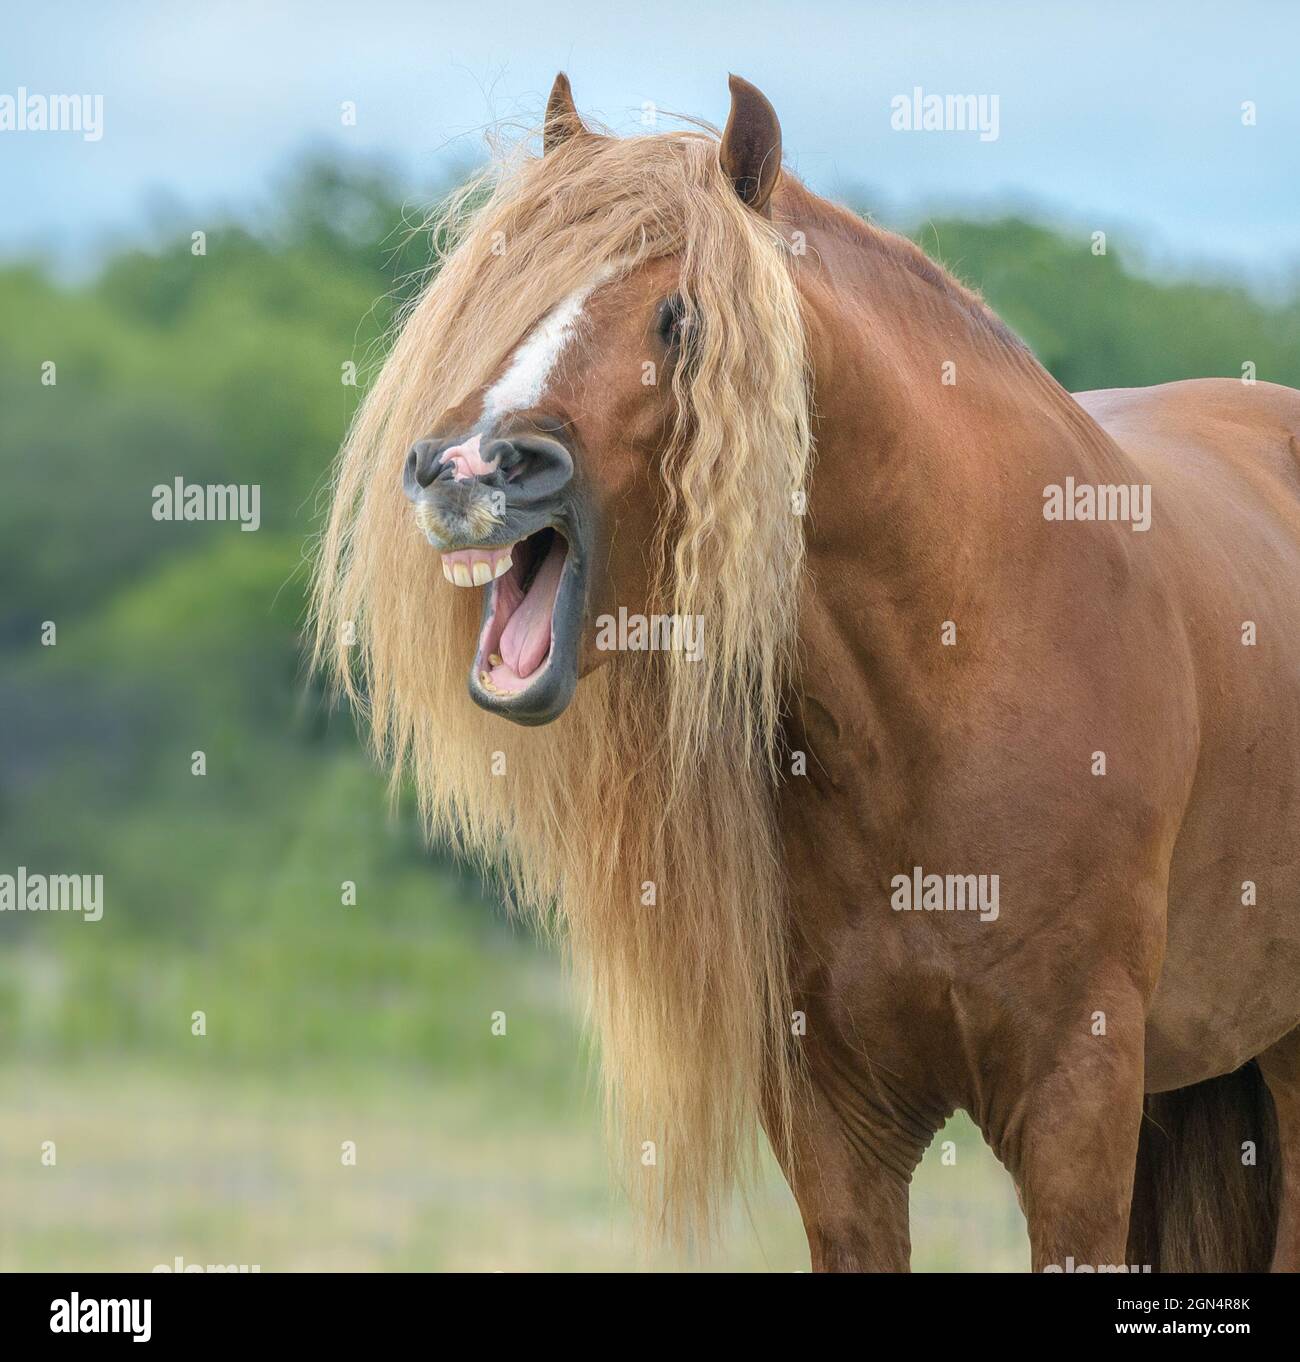 Gypsy Vanner Horse stallion with comical facial expression Stock Photo